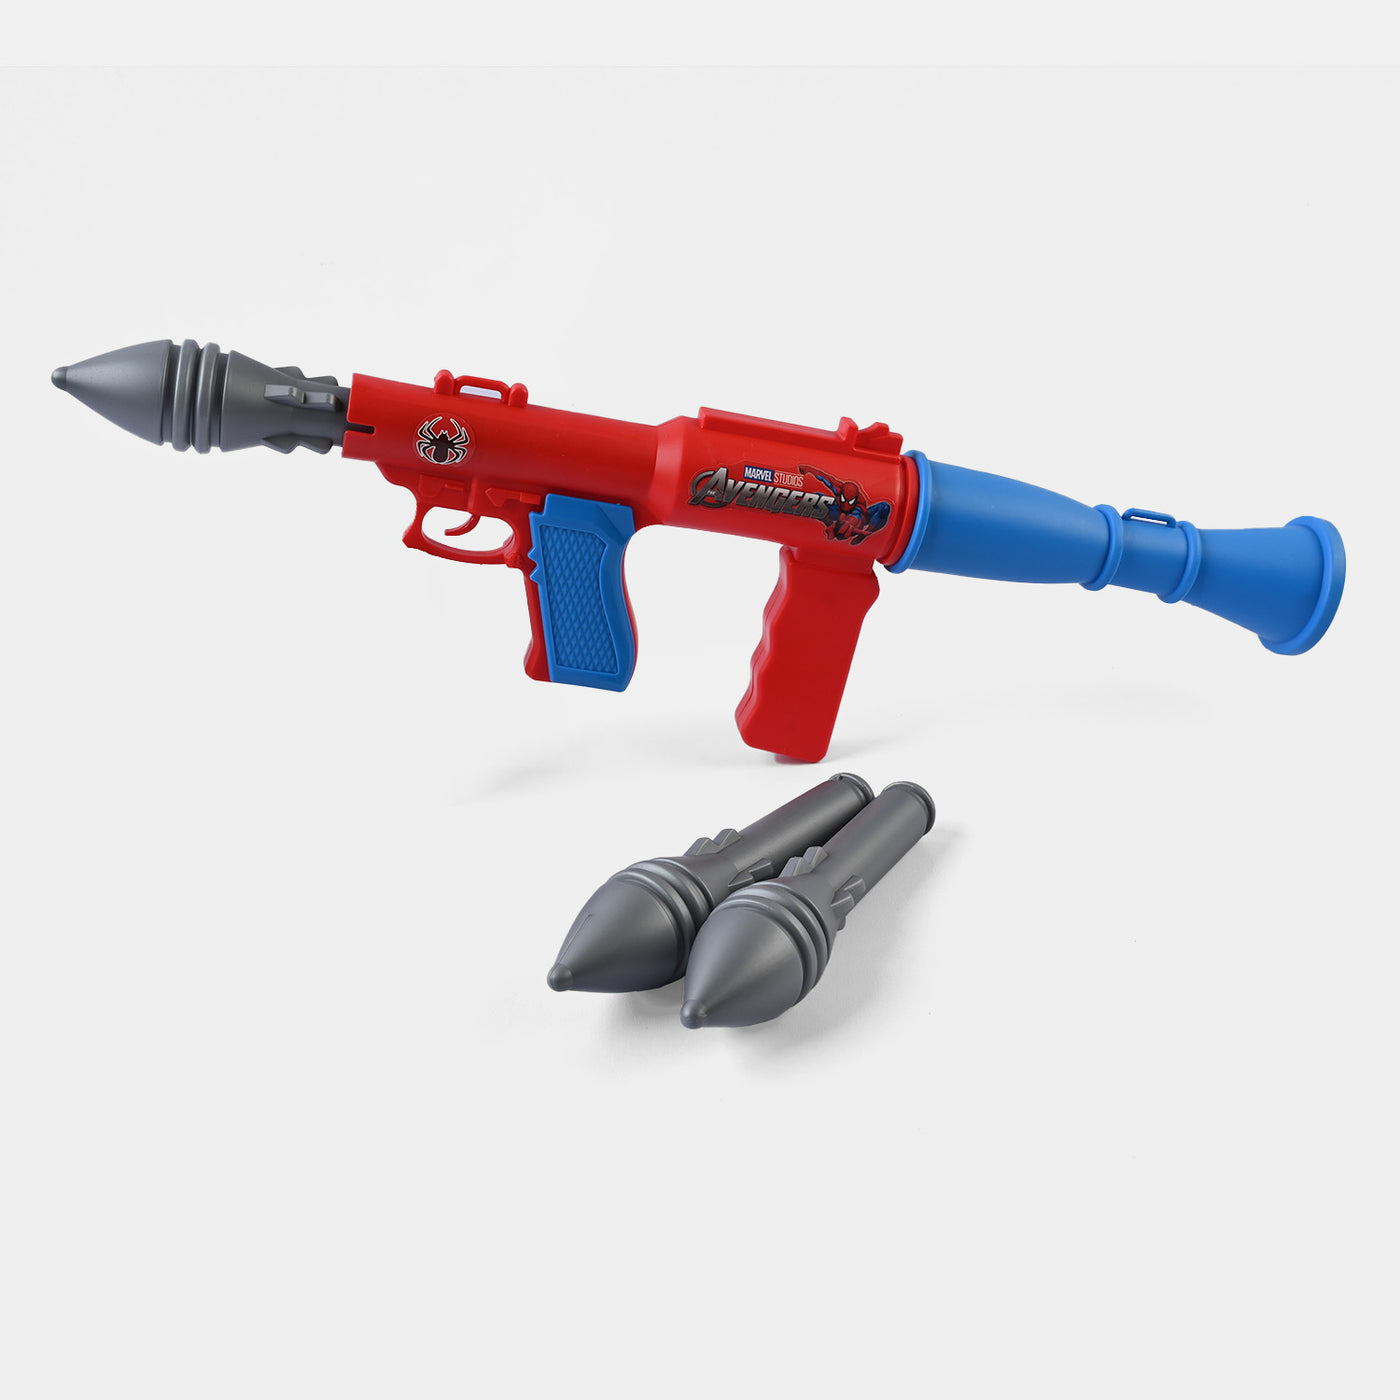 Target Launcher For Kids